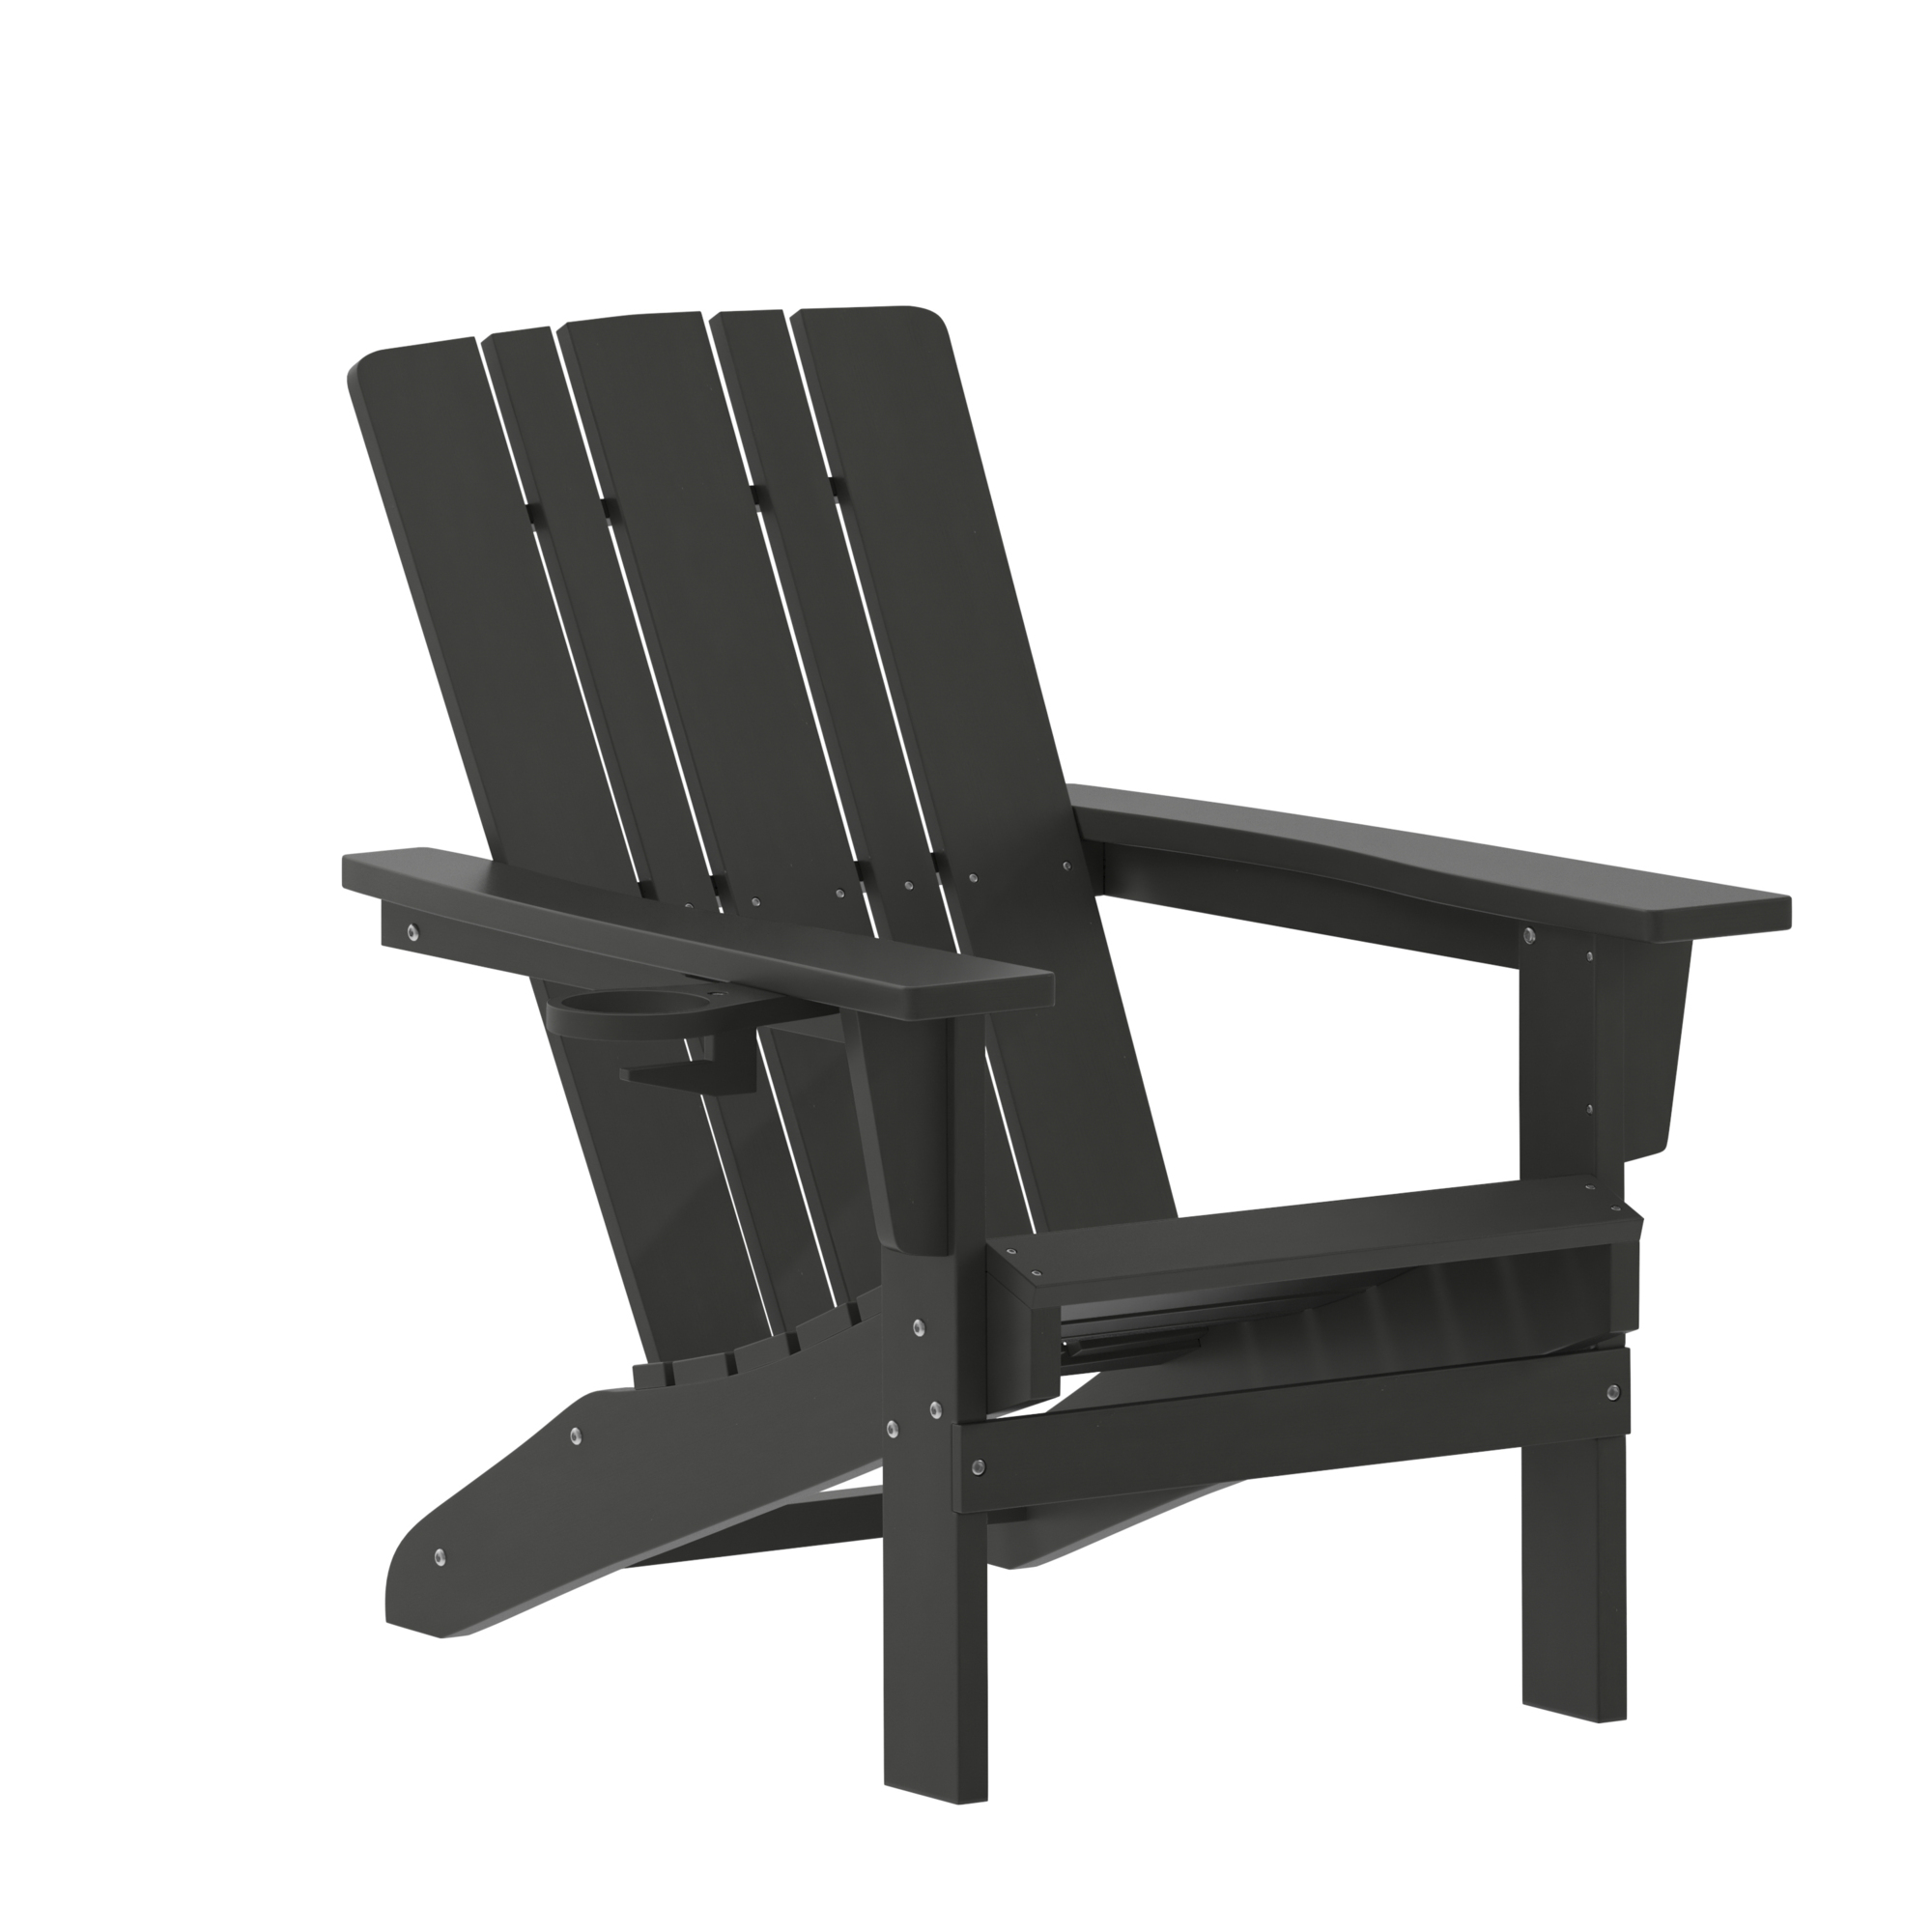 Flash Furniture, Black Adirondack Patio Chair with Cupholder, Primary Color Black, Material HDPE, Width 33.5 in, Model LEHMP104510BK